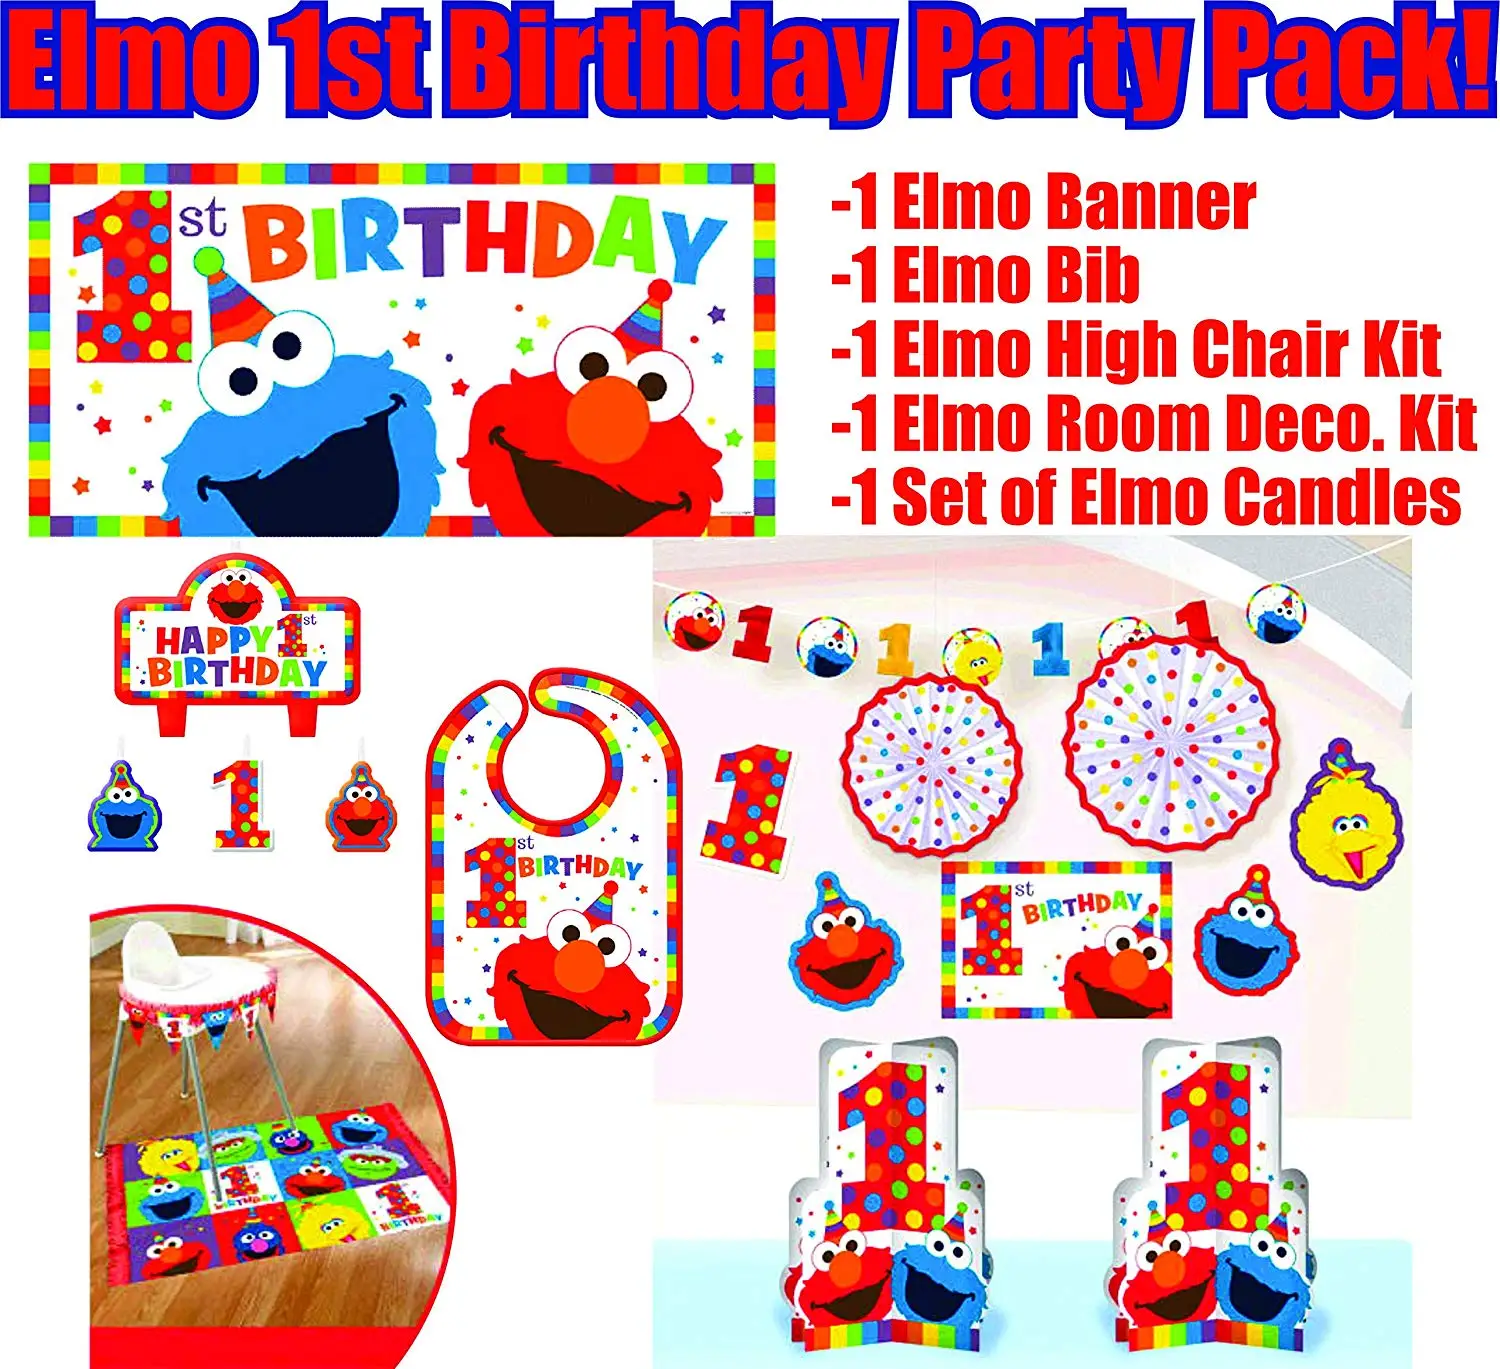 Cheap Birthday Party Elmo Find Birthday Party Elmo Deals On Line At